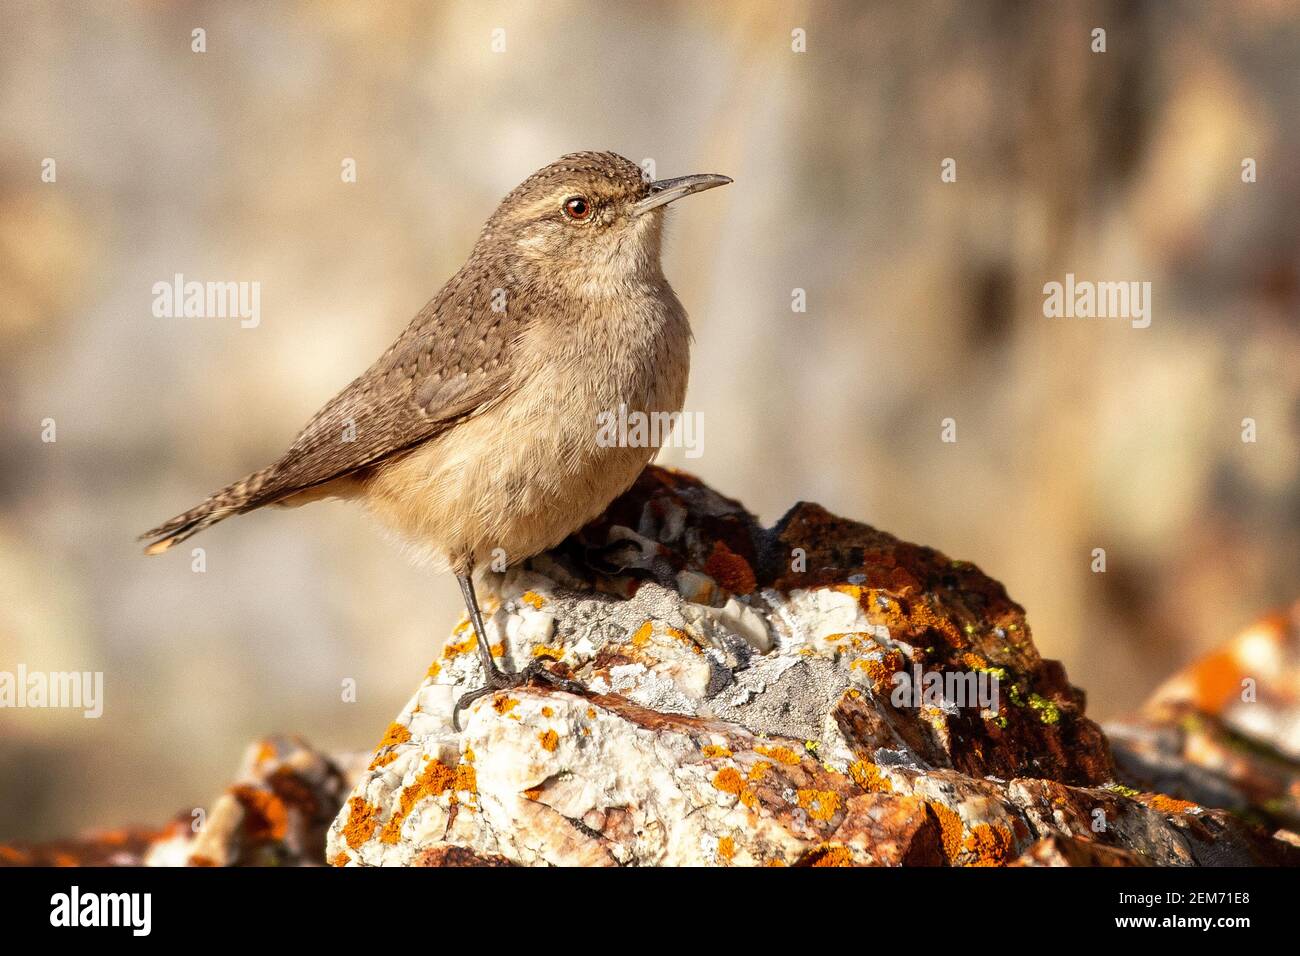 A Rock Wren (Salpinctes obsoletus) poses with its rock at Coyote Hills Regional Park, Fremont, California Stock Photo